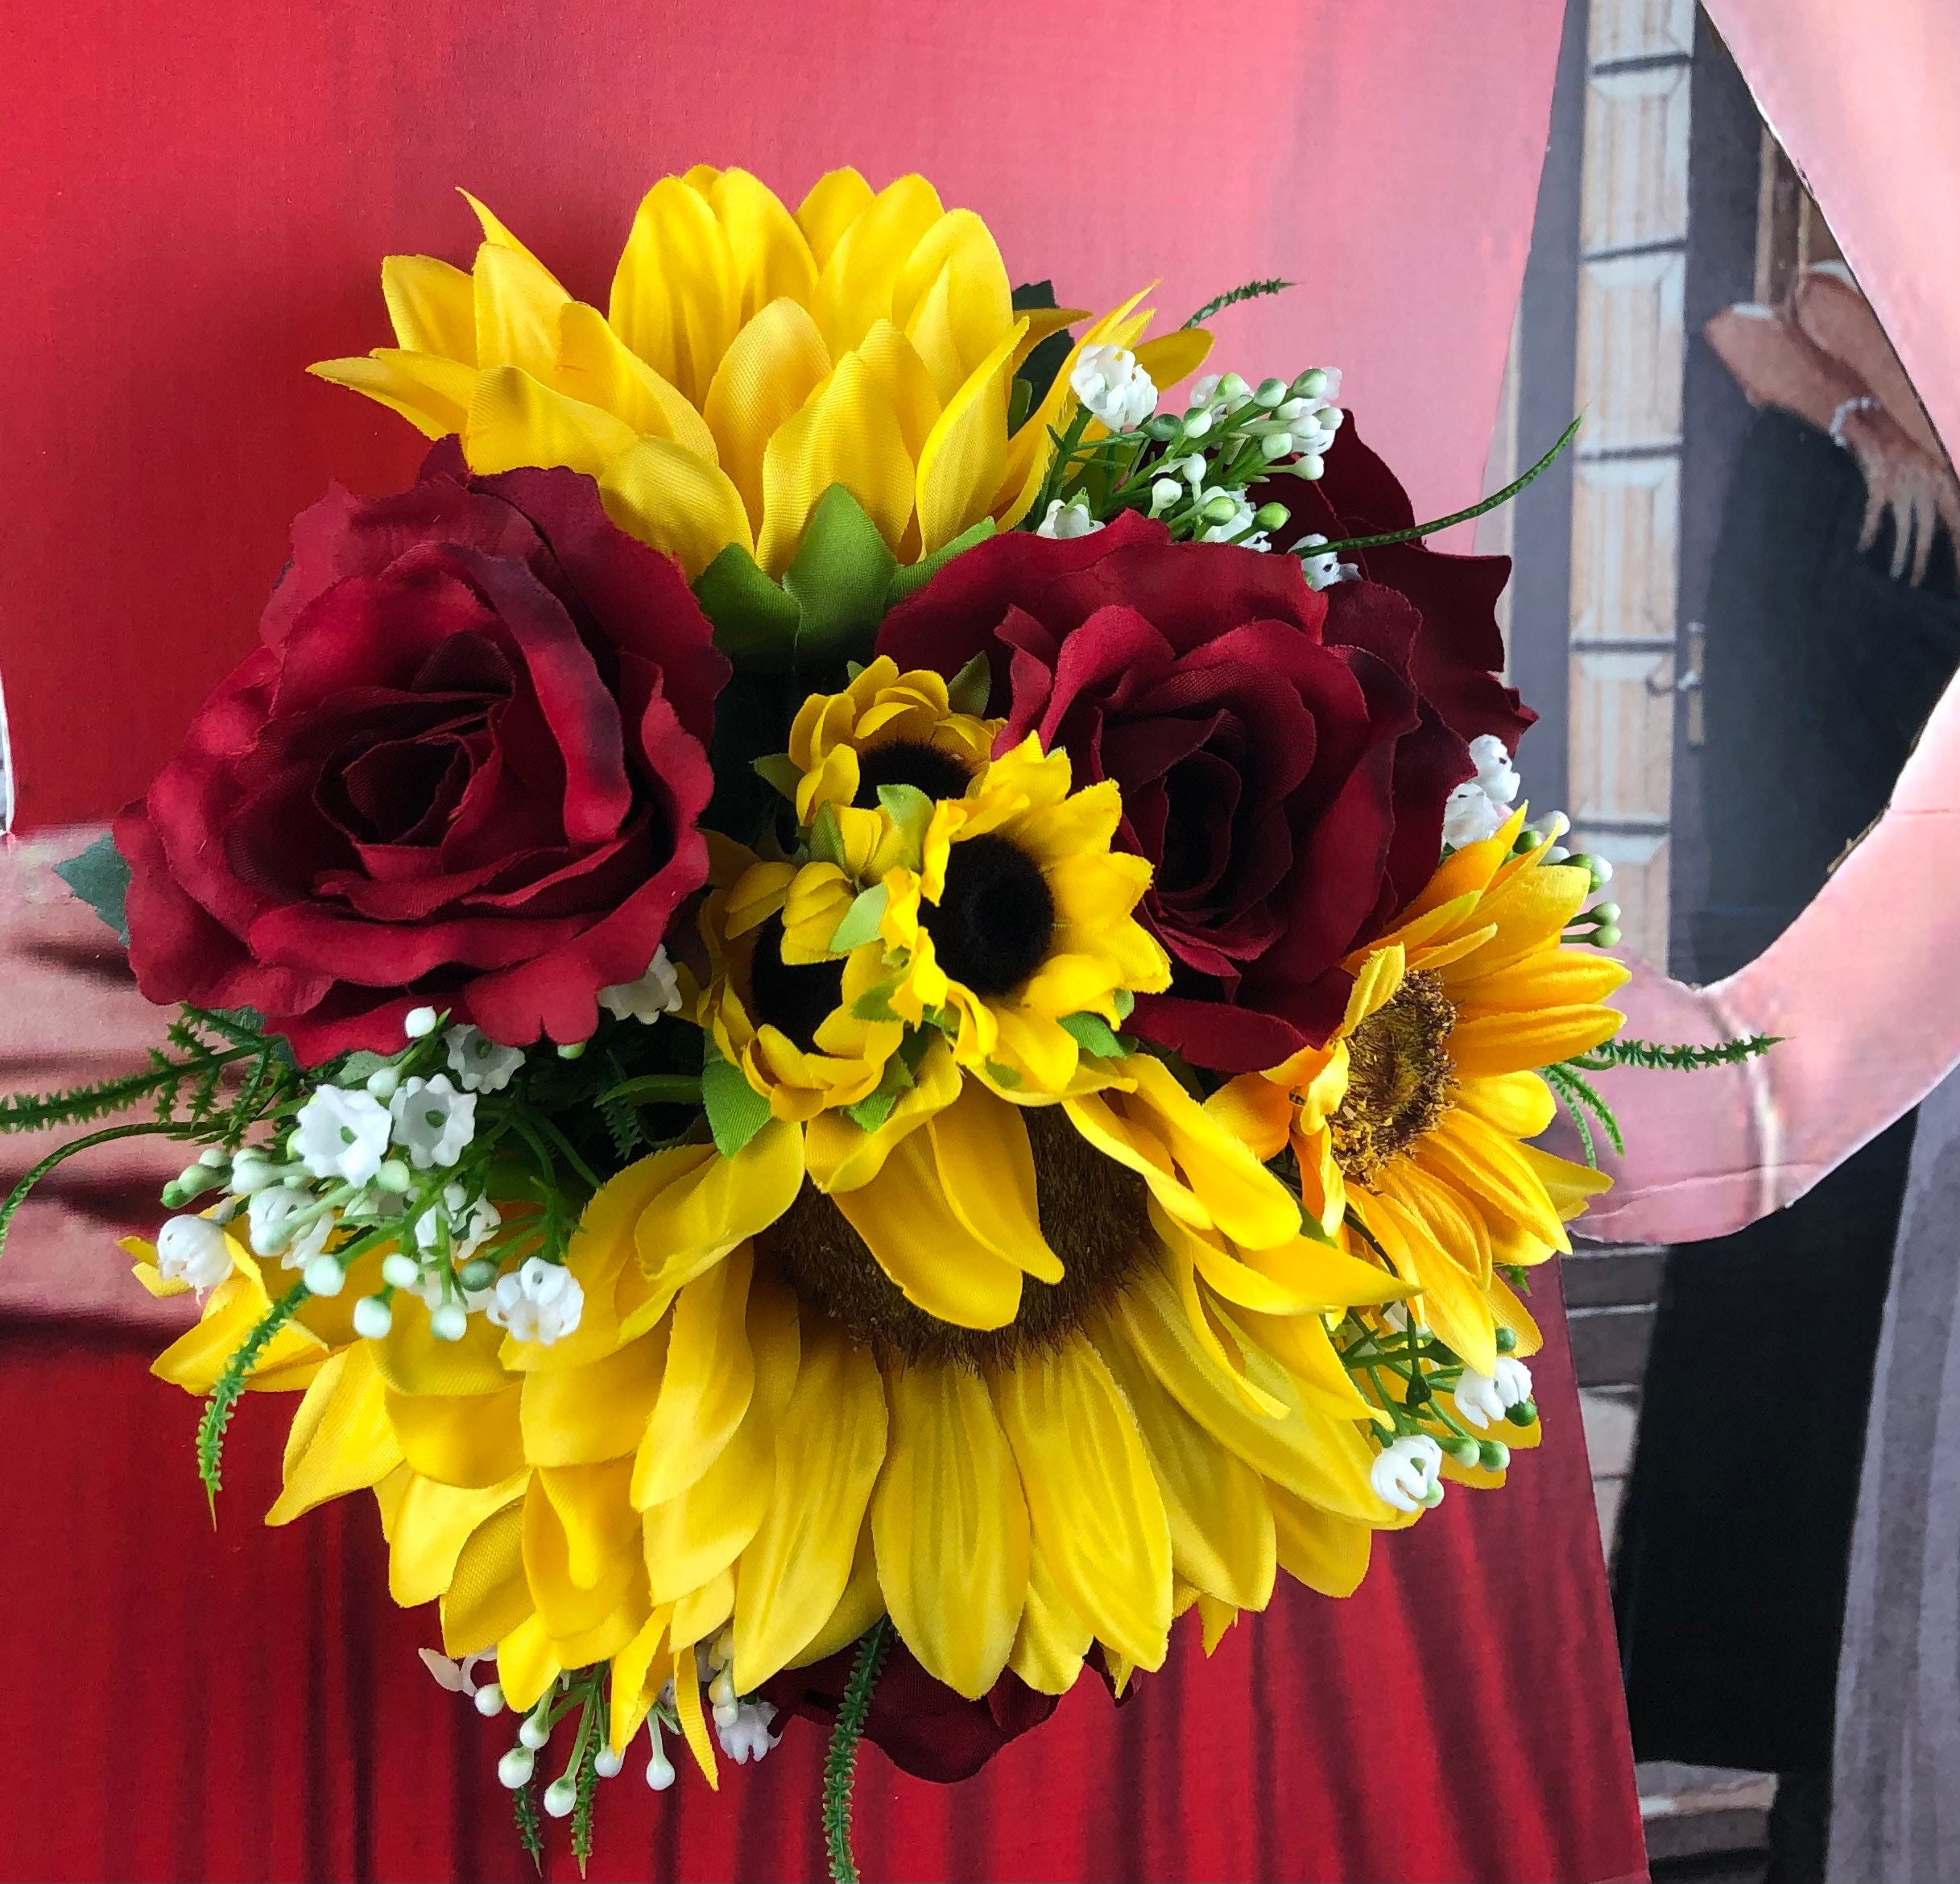 Wedding flowers bridal bouquets decorations RED YELLOW Friends Lovers 7  bouquet